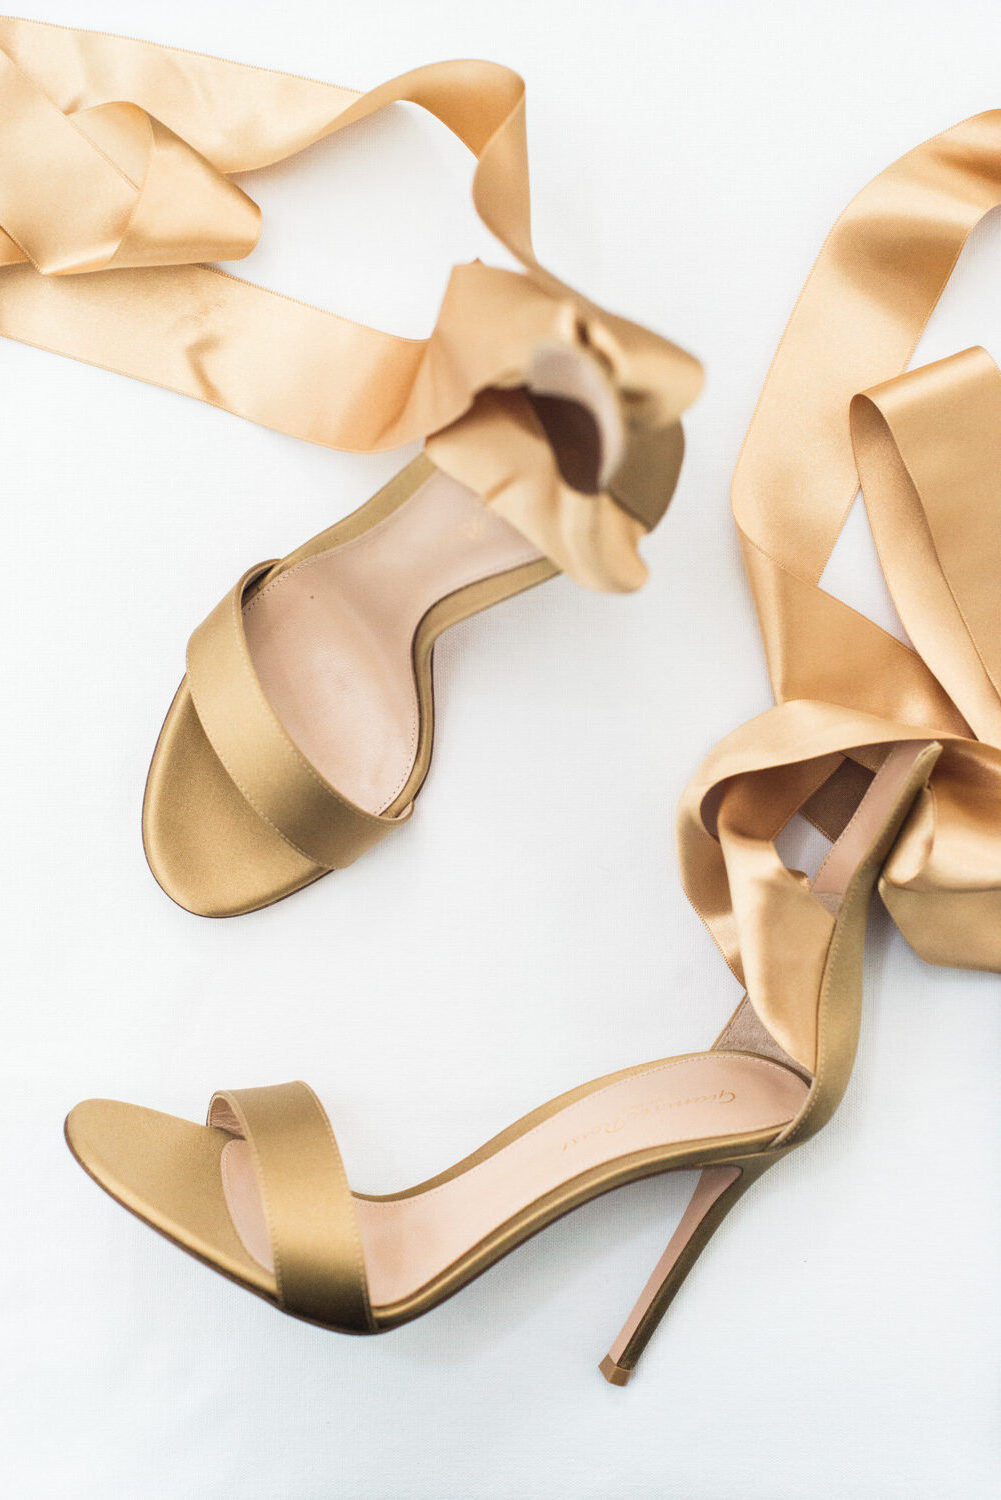 Gold Gianvito Rossi heels with silk ribbons for a luxurious wedding, styled by Something Borrowed Something New